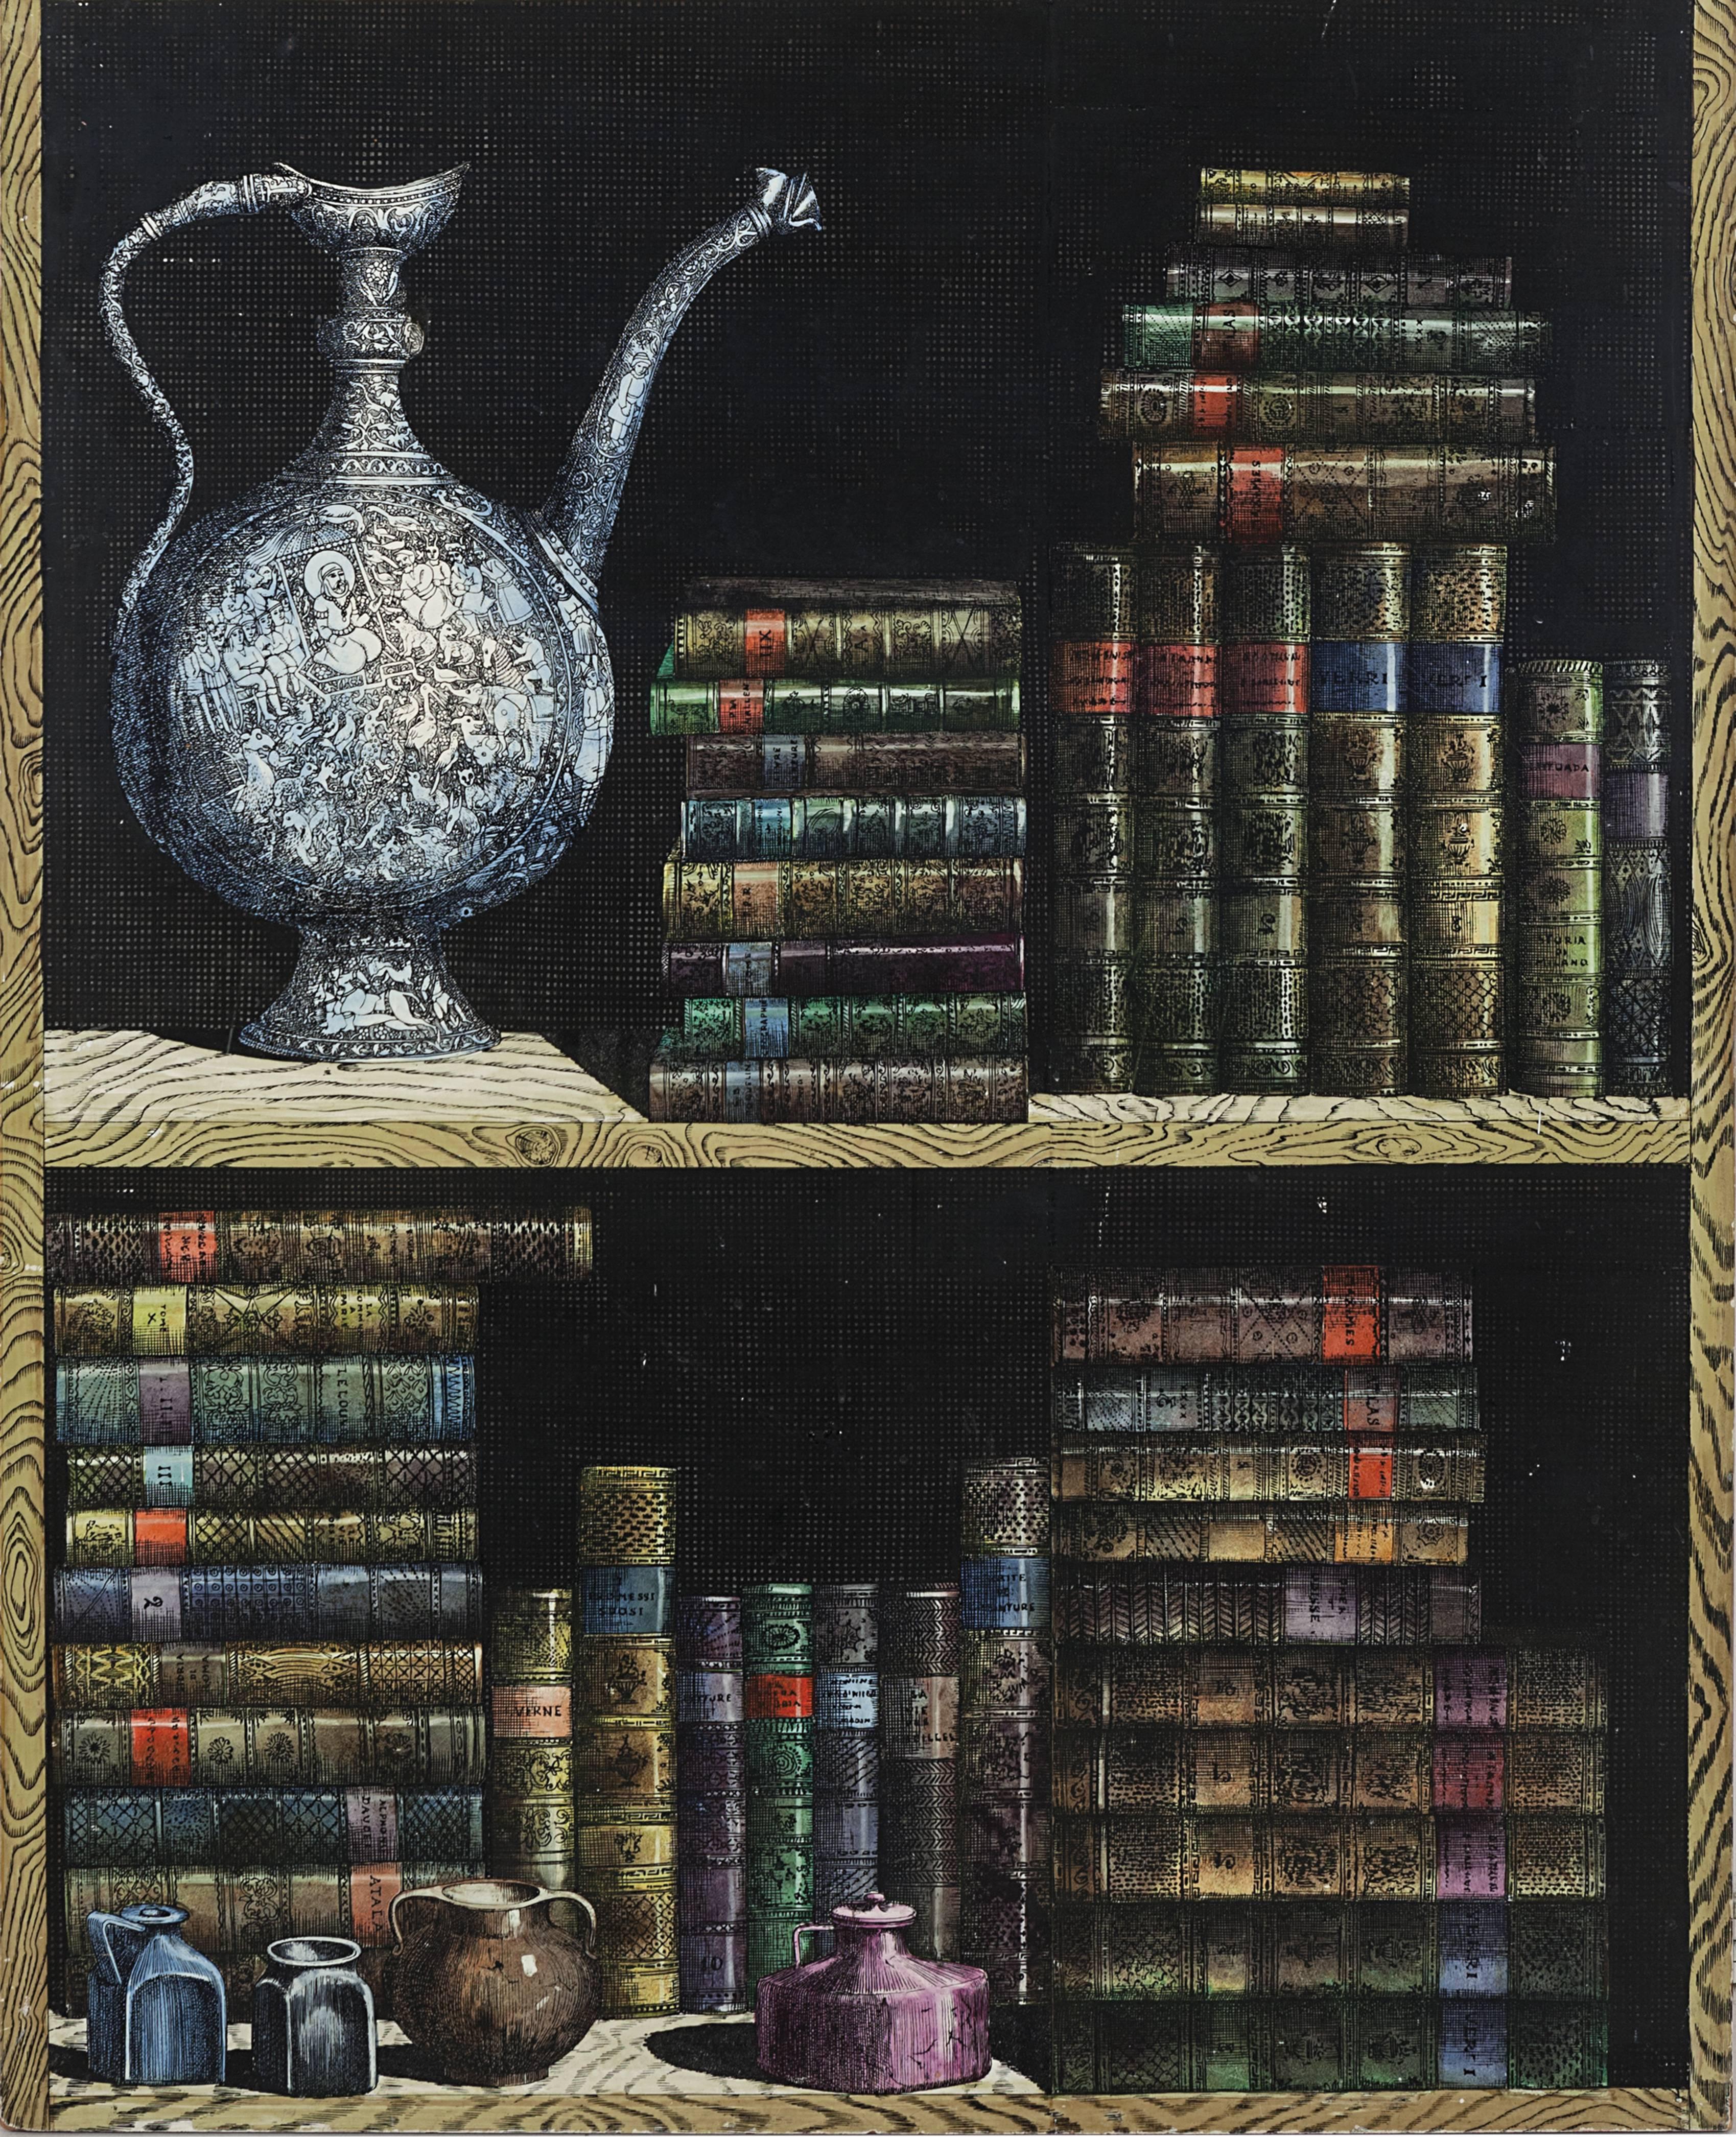 Piero Fornasetti,
pair of doors of a cupboard made for a private custode,
wood decorated with trompe l'oeil pattern,
circa 1950, Italy.
Measures: Height 145 cm, width 158 cm, depth 3.5 cm.